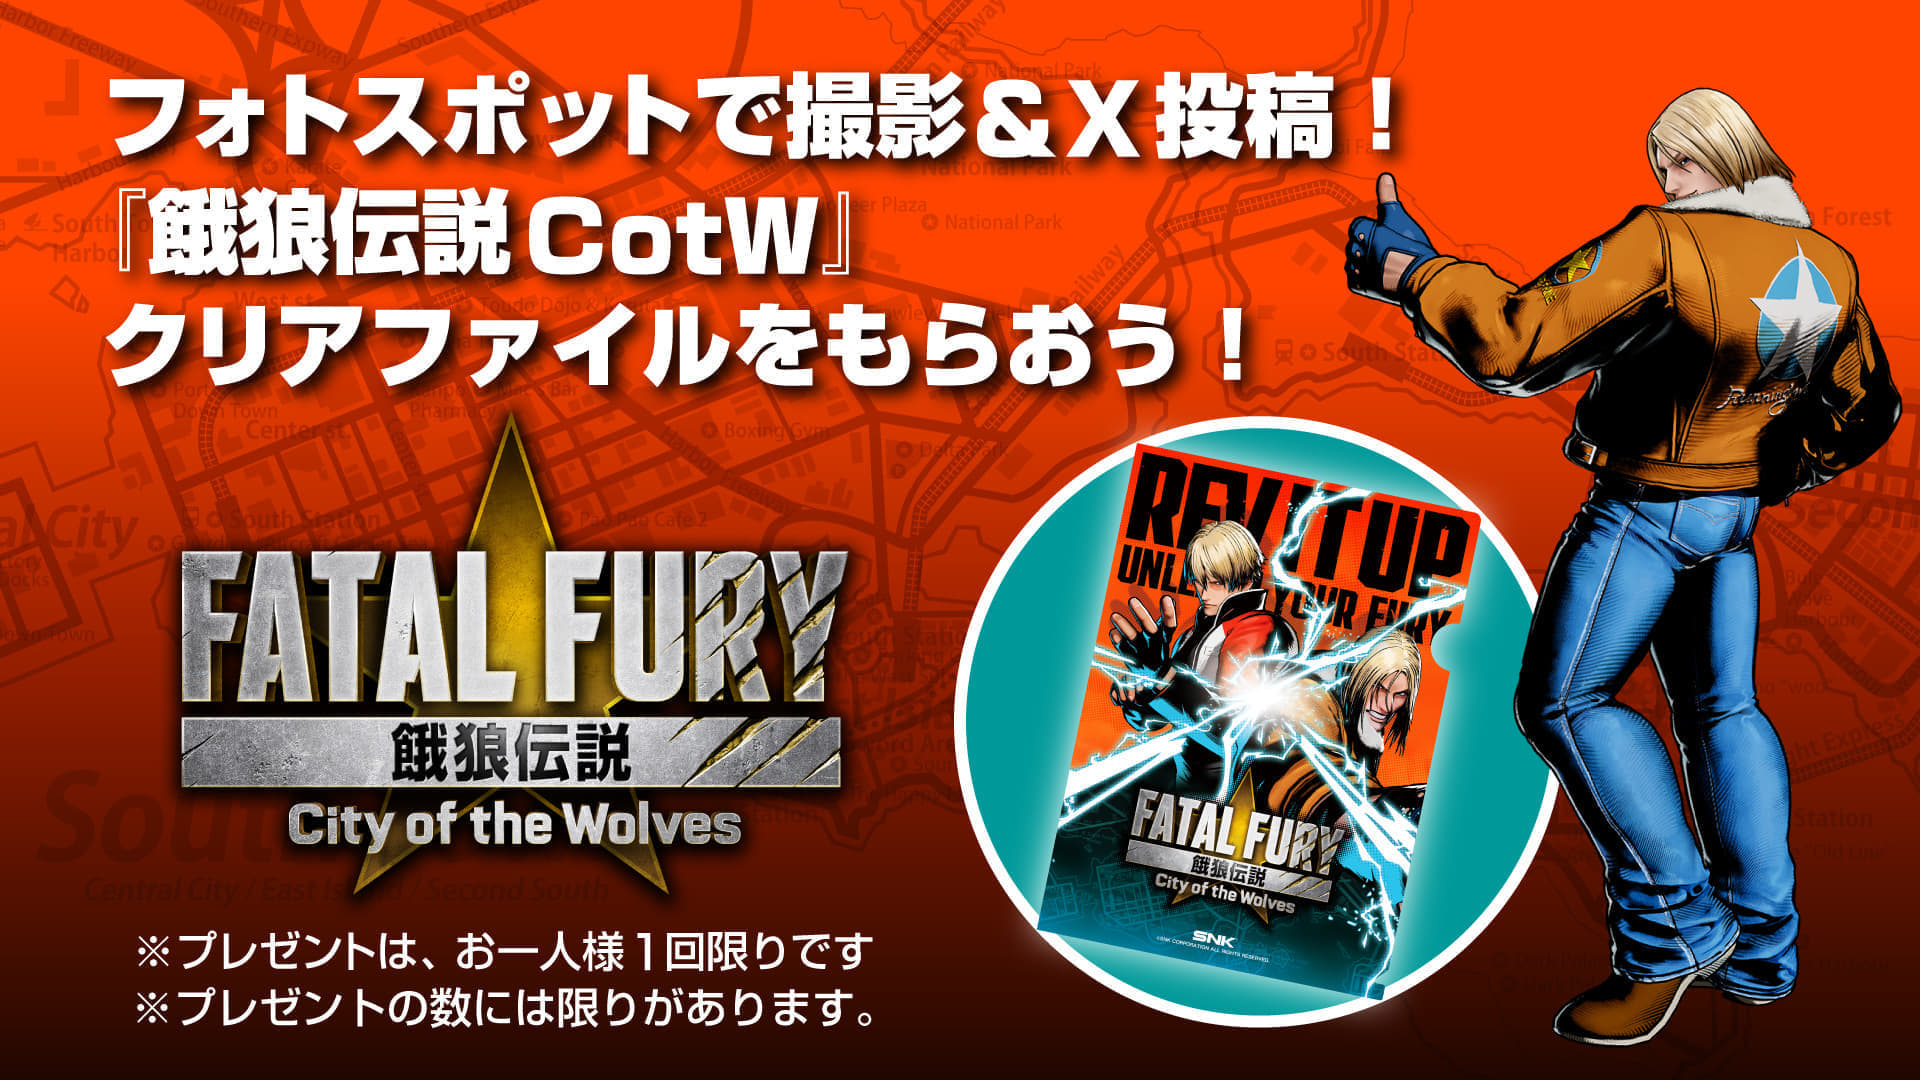 “Fatal Fury City of the Wolves” first trial will be held at EVO Japan_010